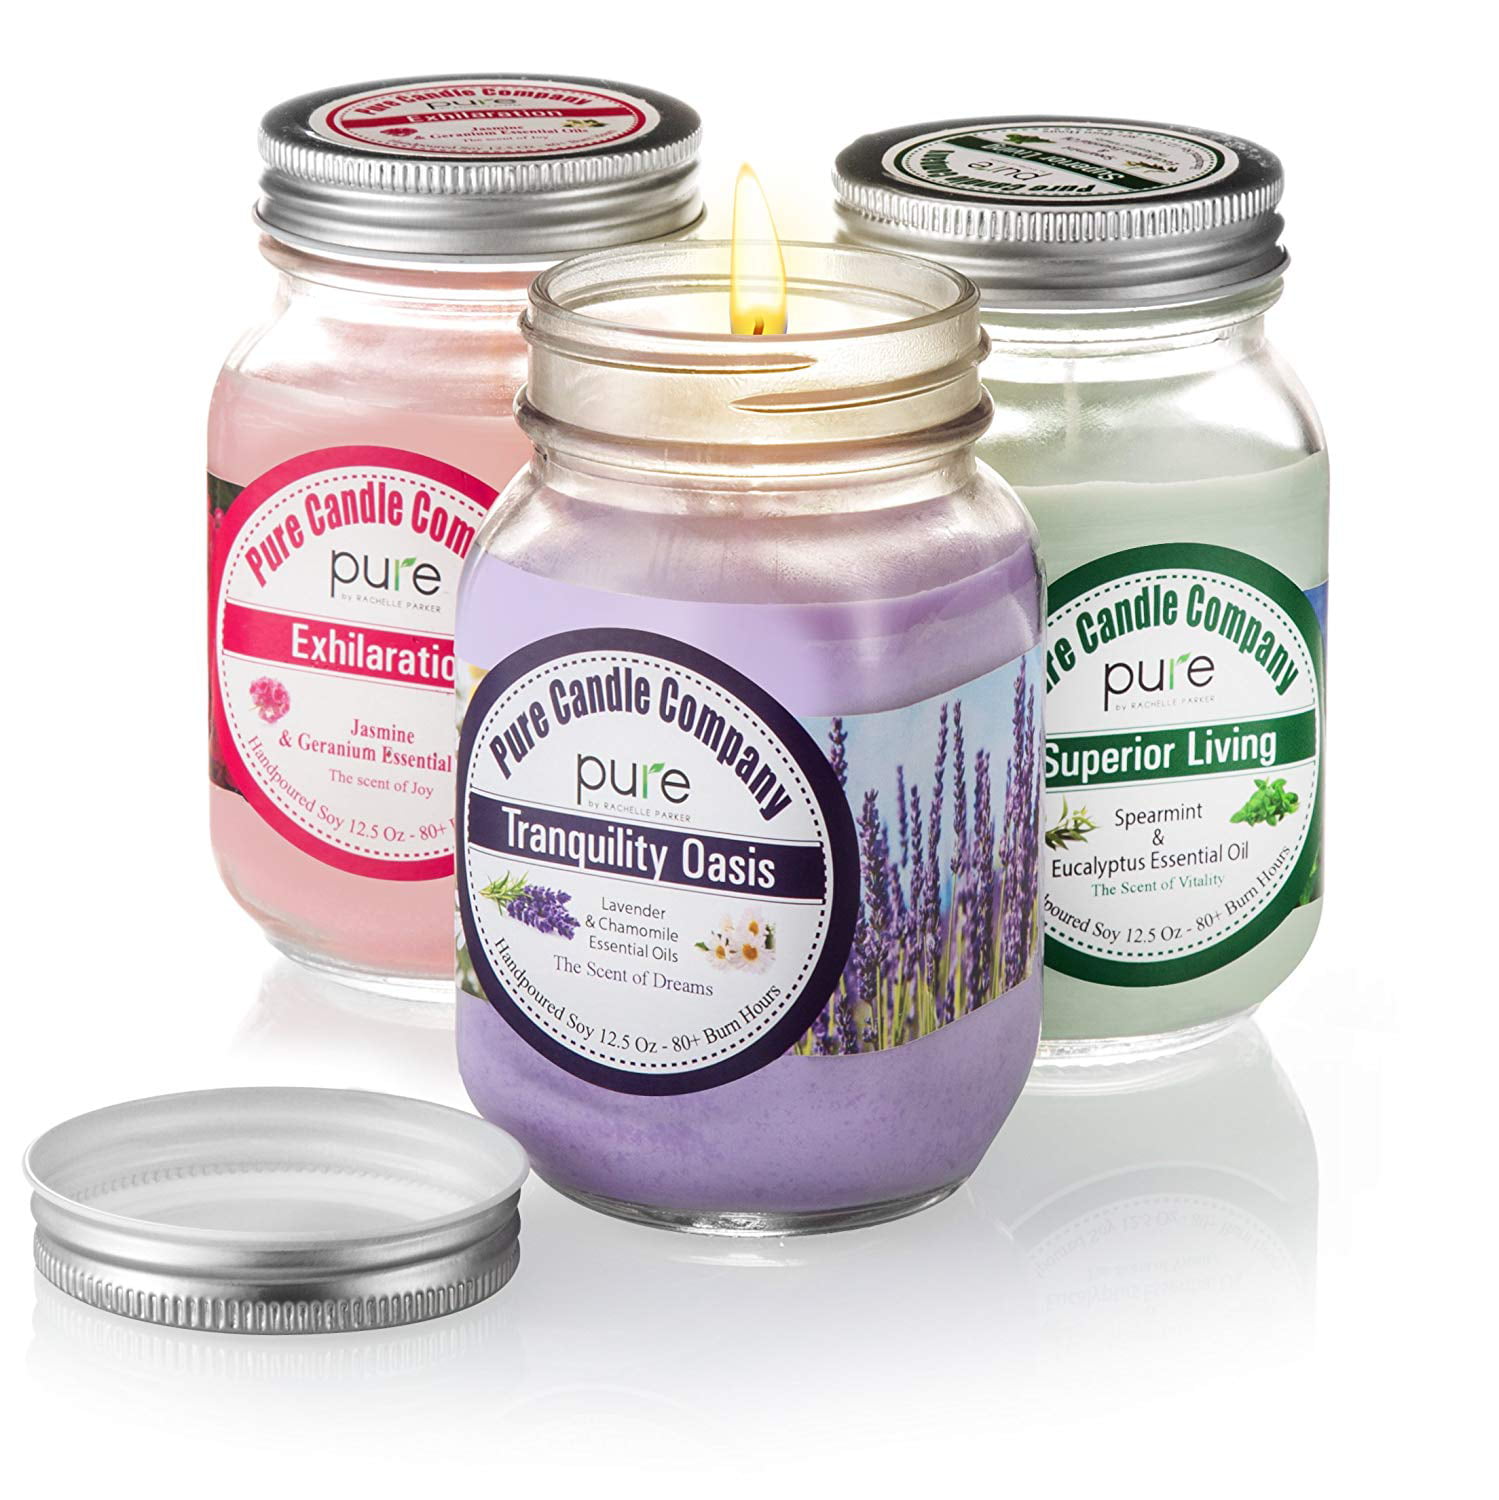 Phthalate Free Premium Fragrance with Essential oil Vegan candle Scented Candle Pack Eco-Friendly Mason Jar Soy Candle Gift Set